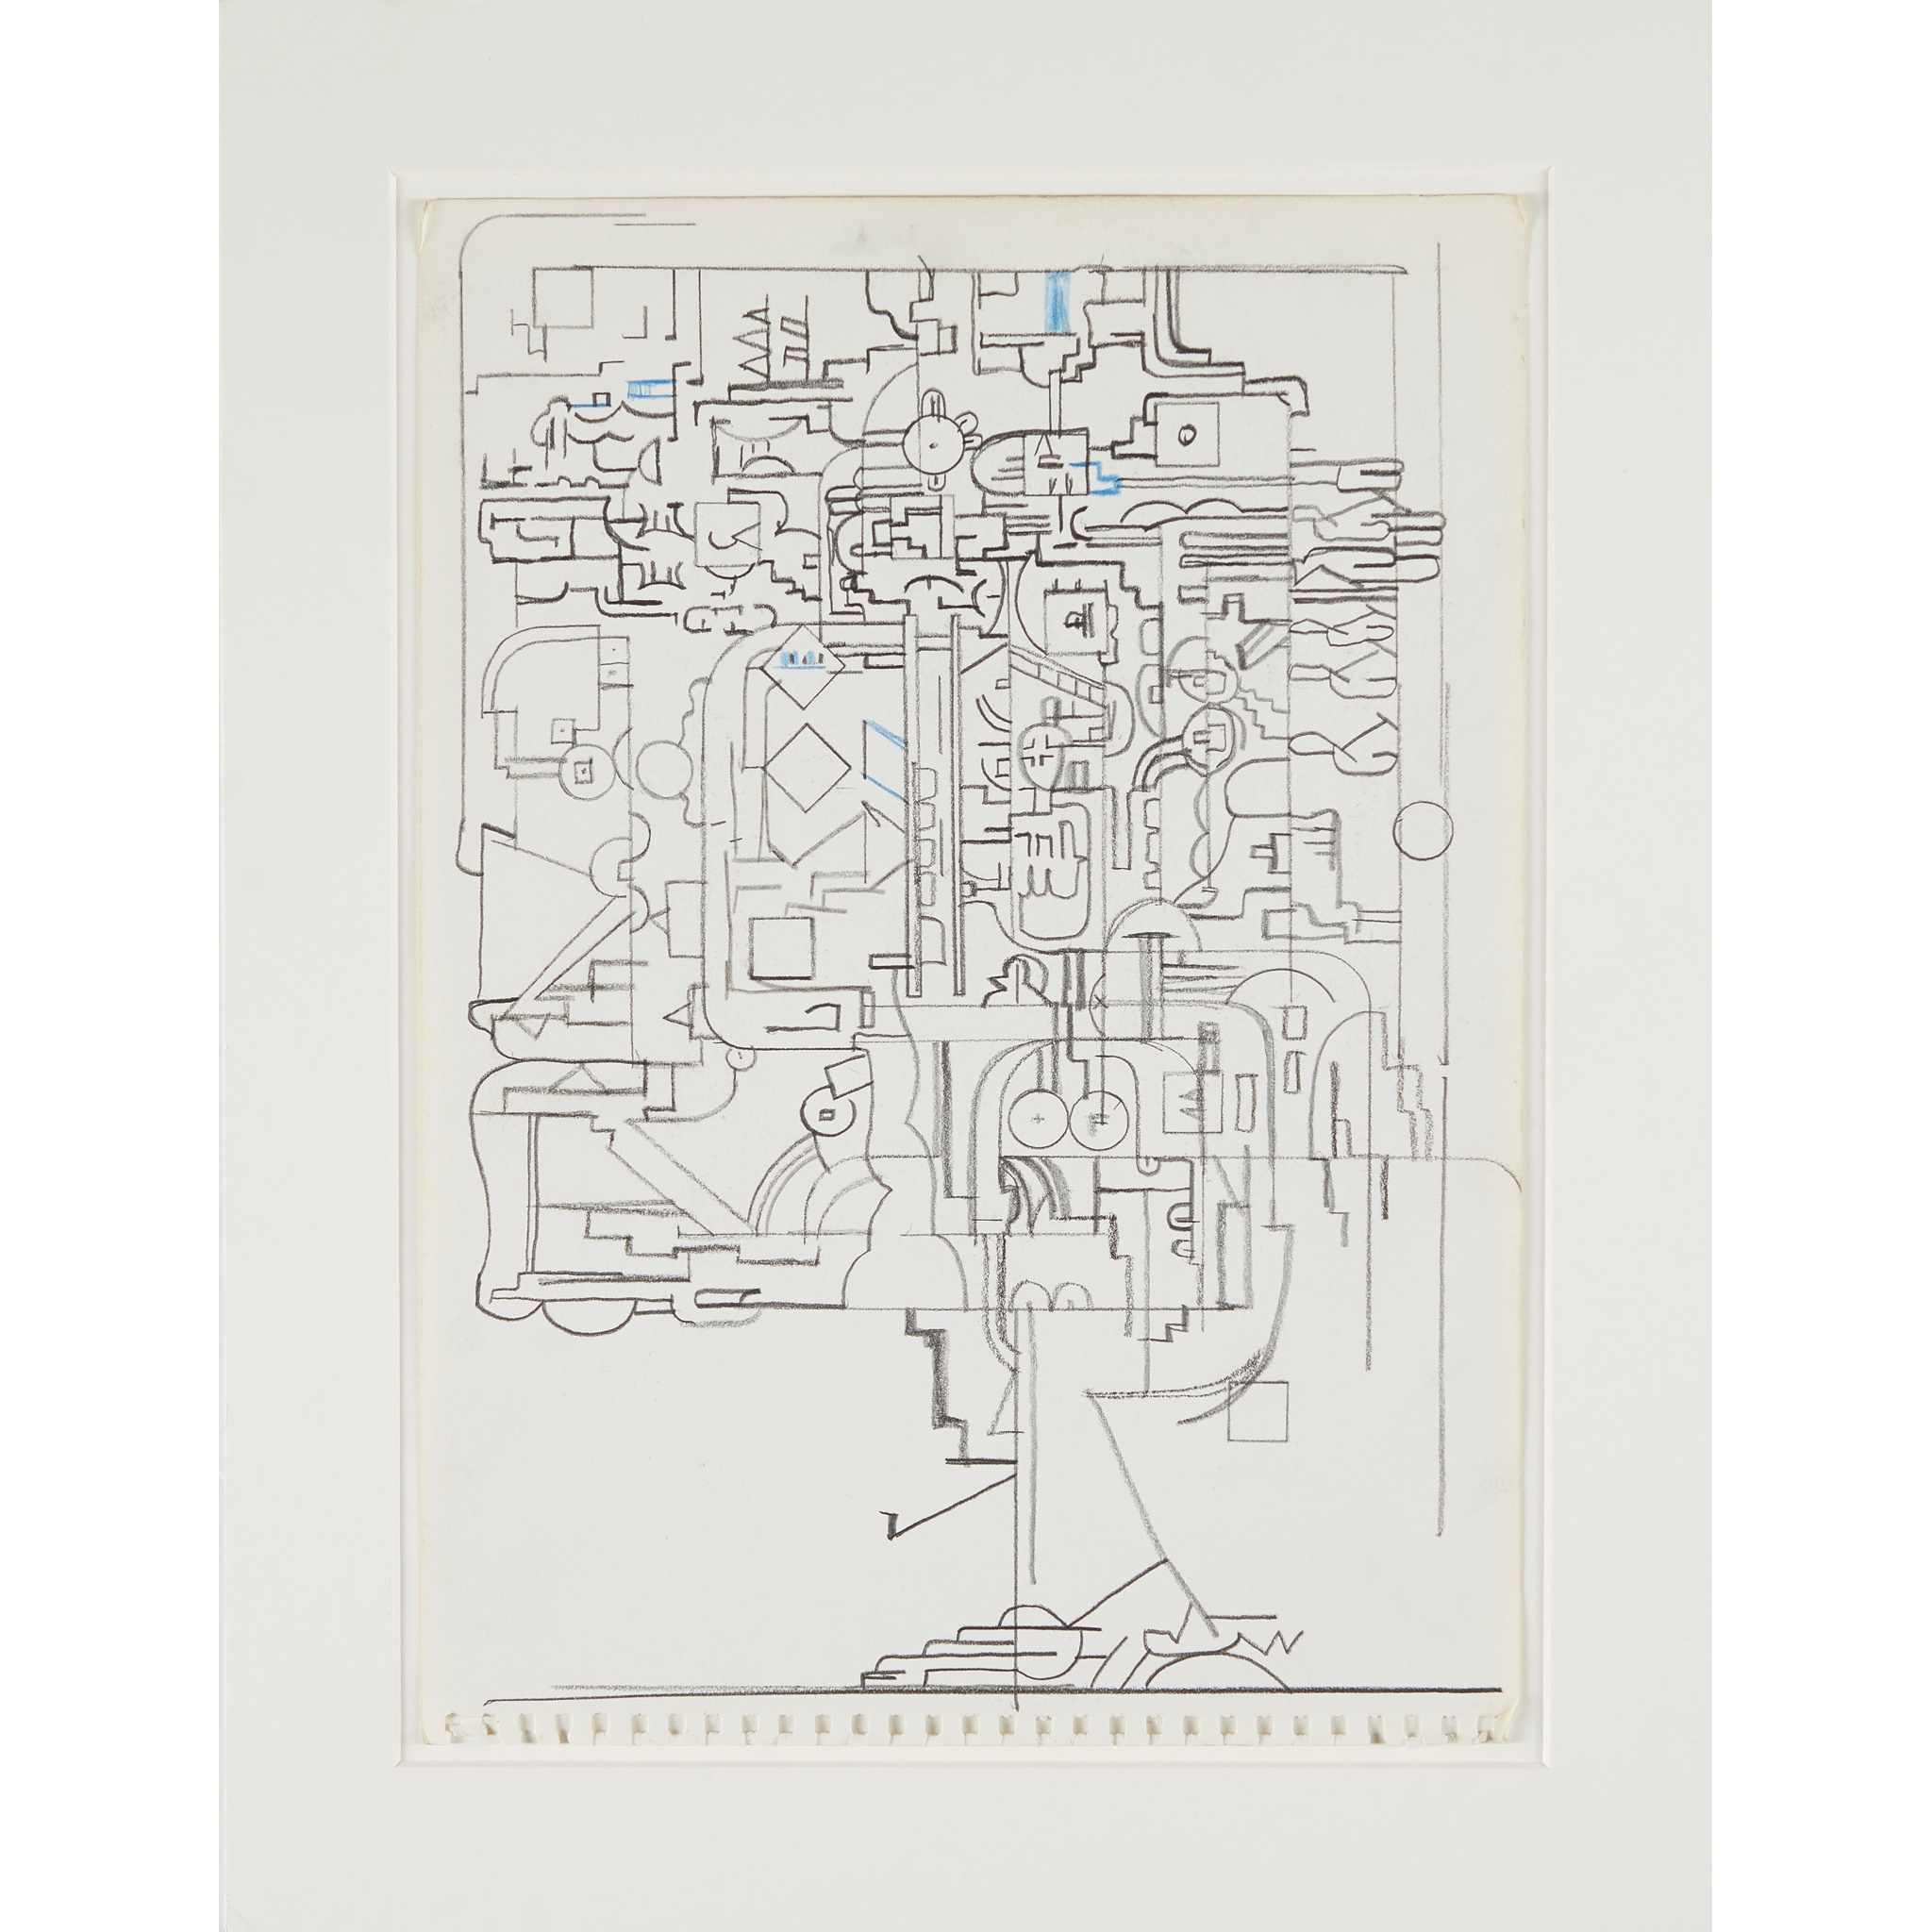 § EDUARDO PAOLOZZI K.B.E., R.A., H.R.S.A. (SCOTTISH 1924-2005) DRAWING WITH BLUE ELEMENTS - Image 2 of 2